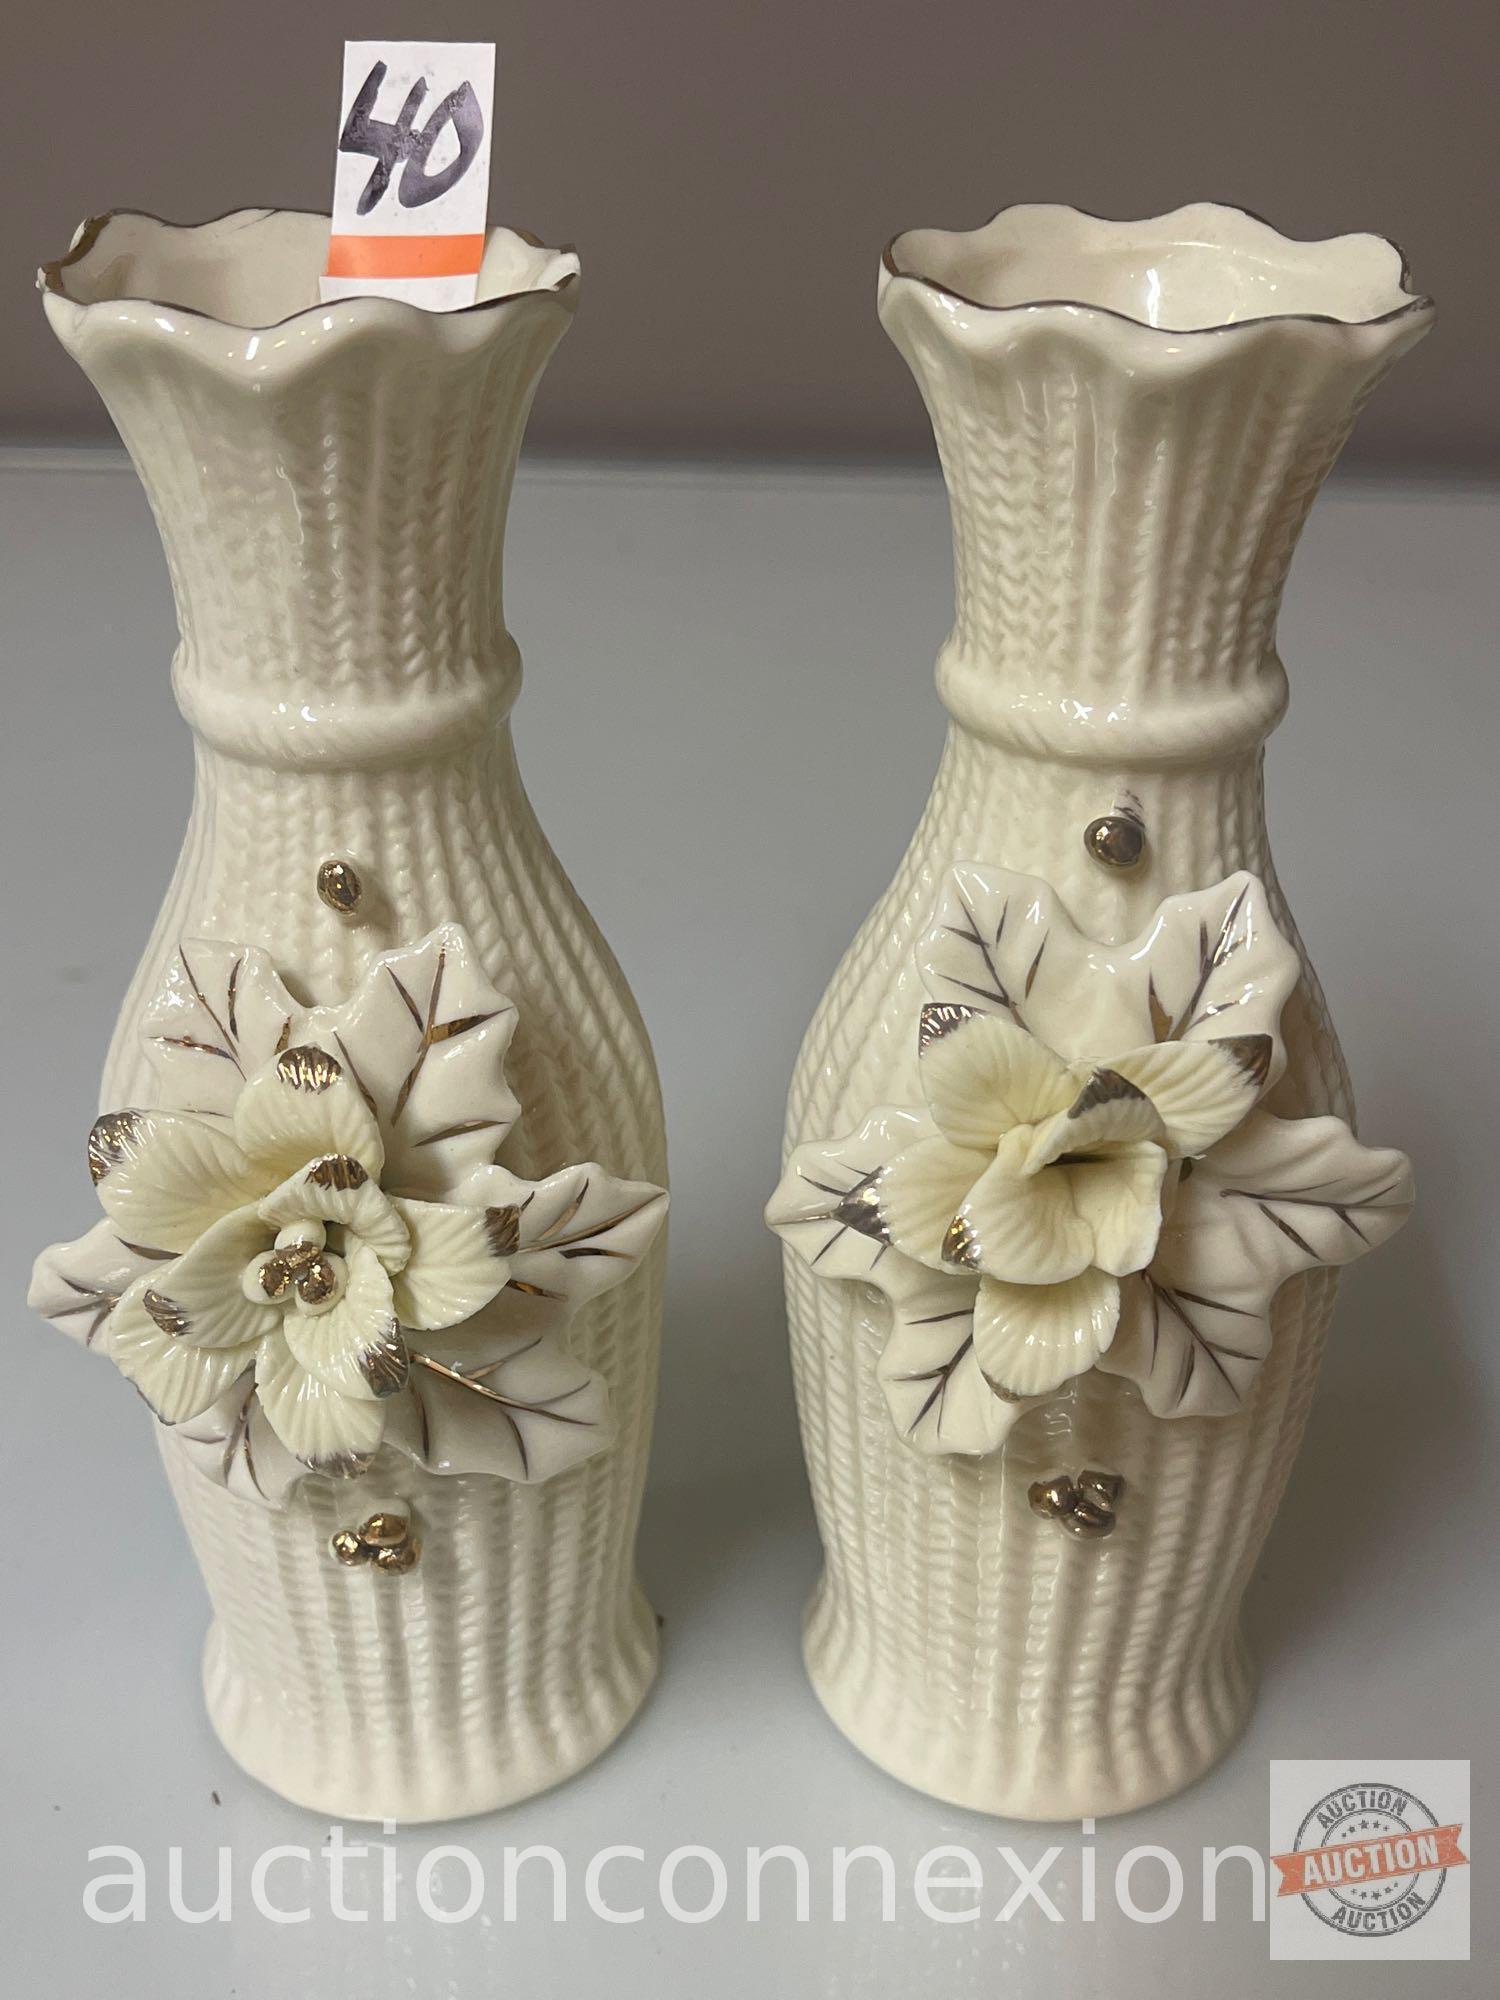 5 vases - 4" to 6.5"h